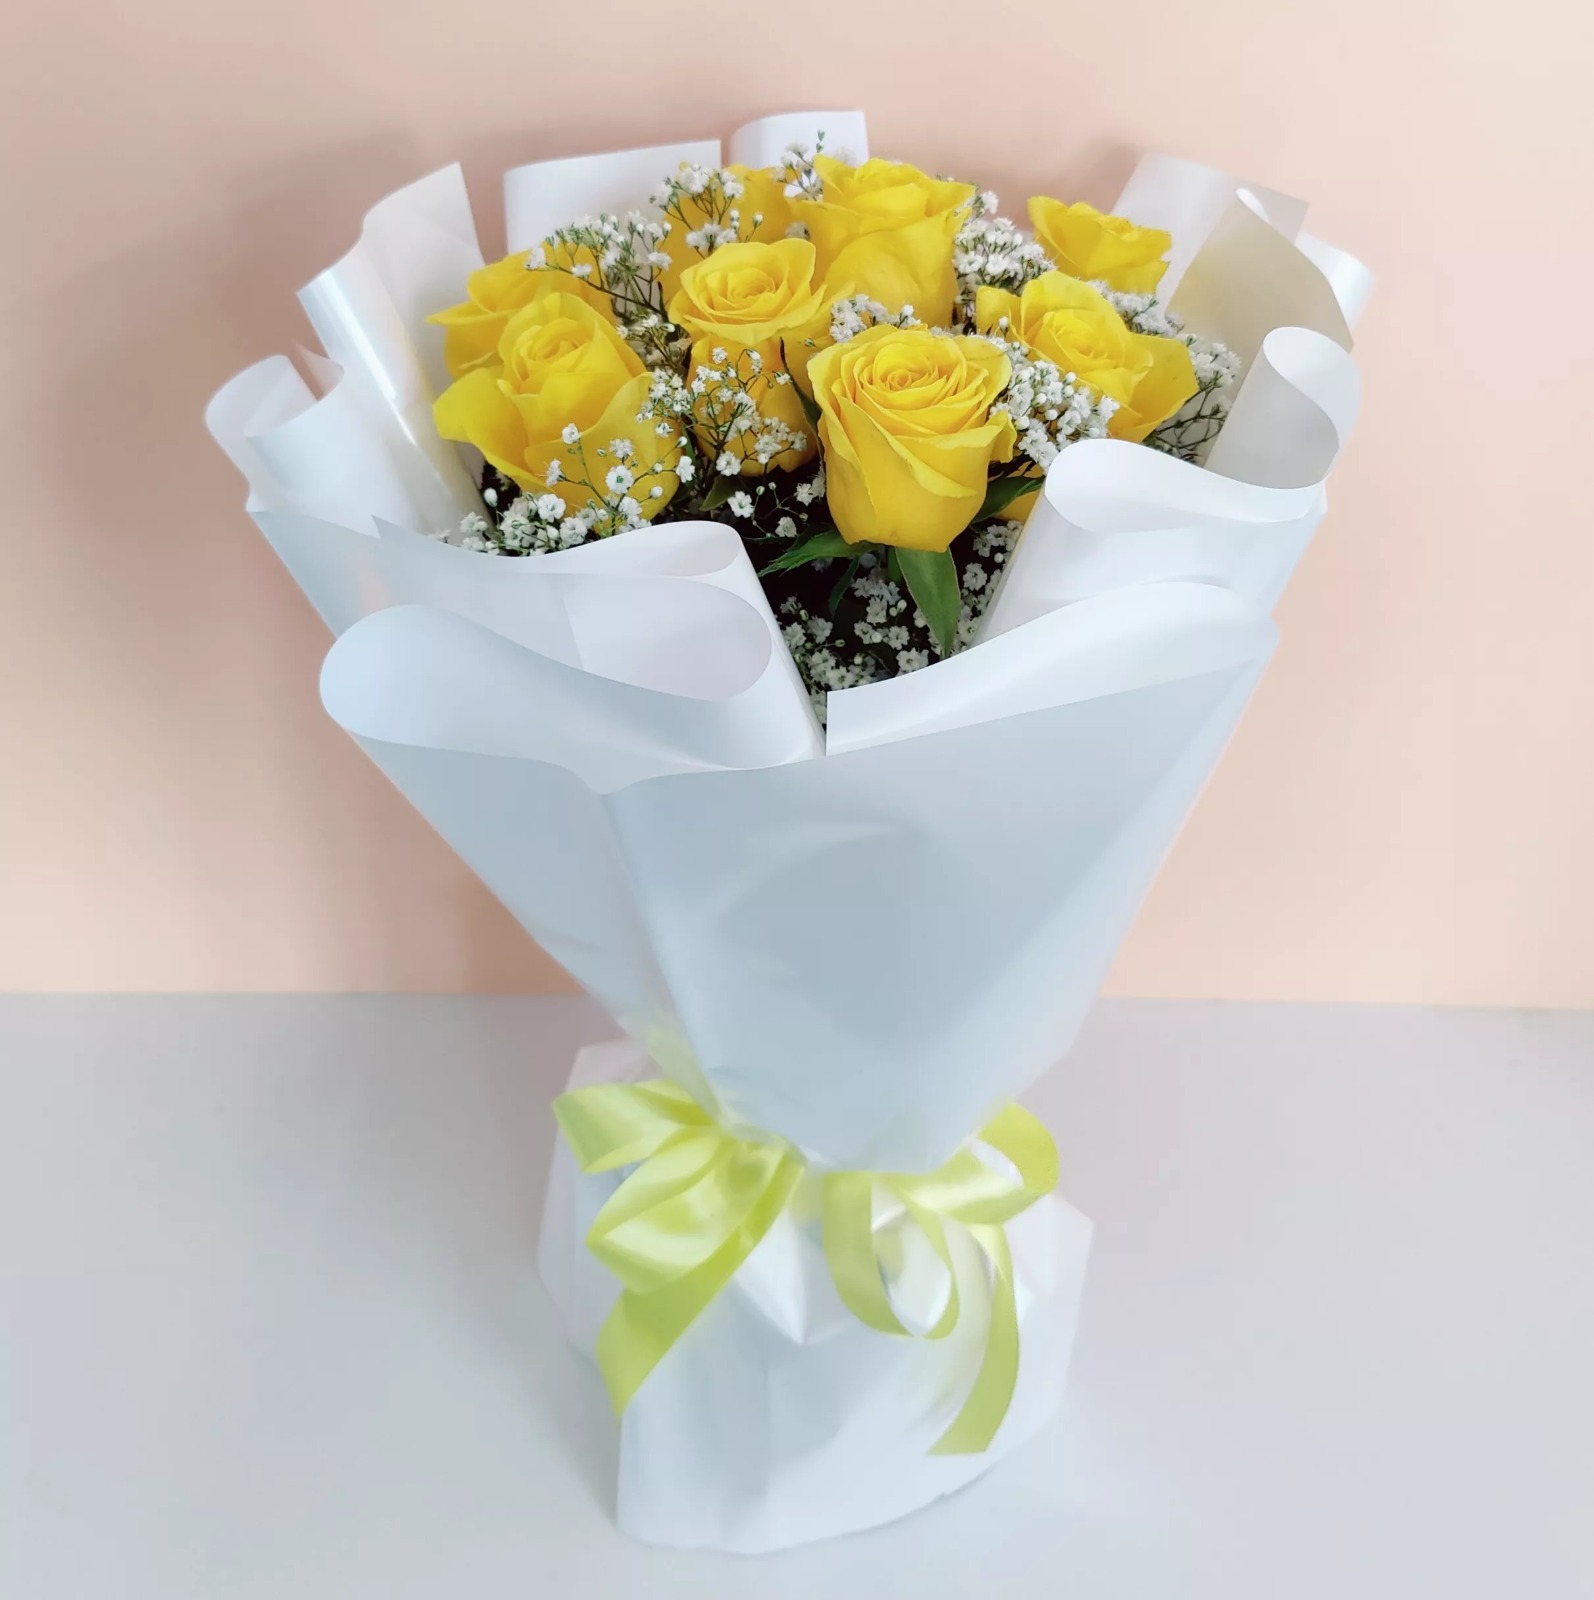 Hand Bouquet Delivery Dubai | Online Florist for Same Day